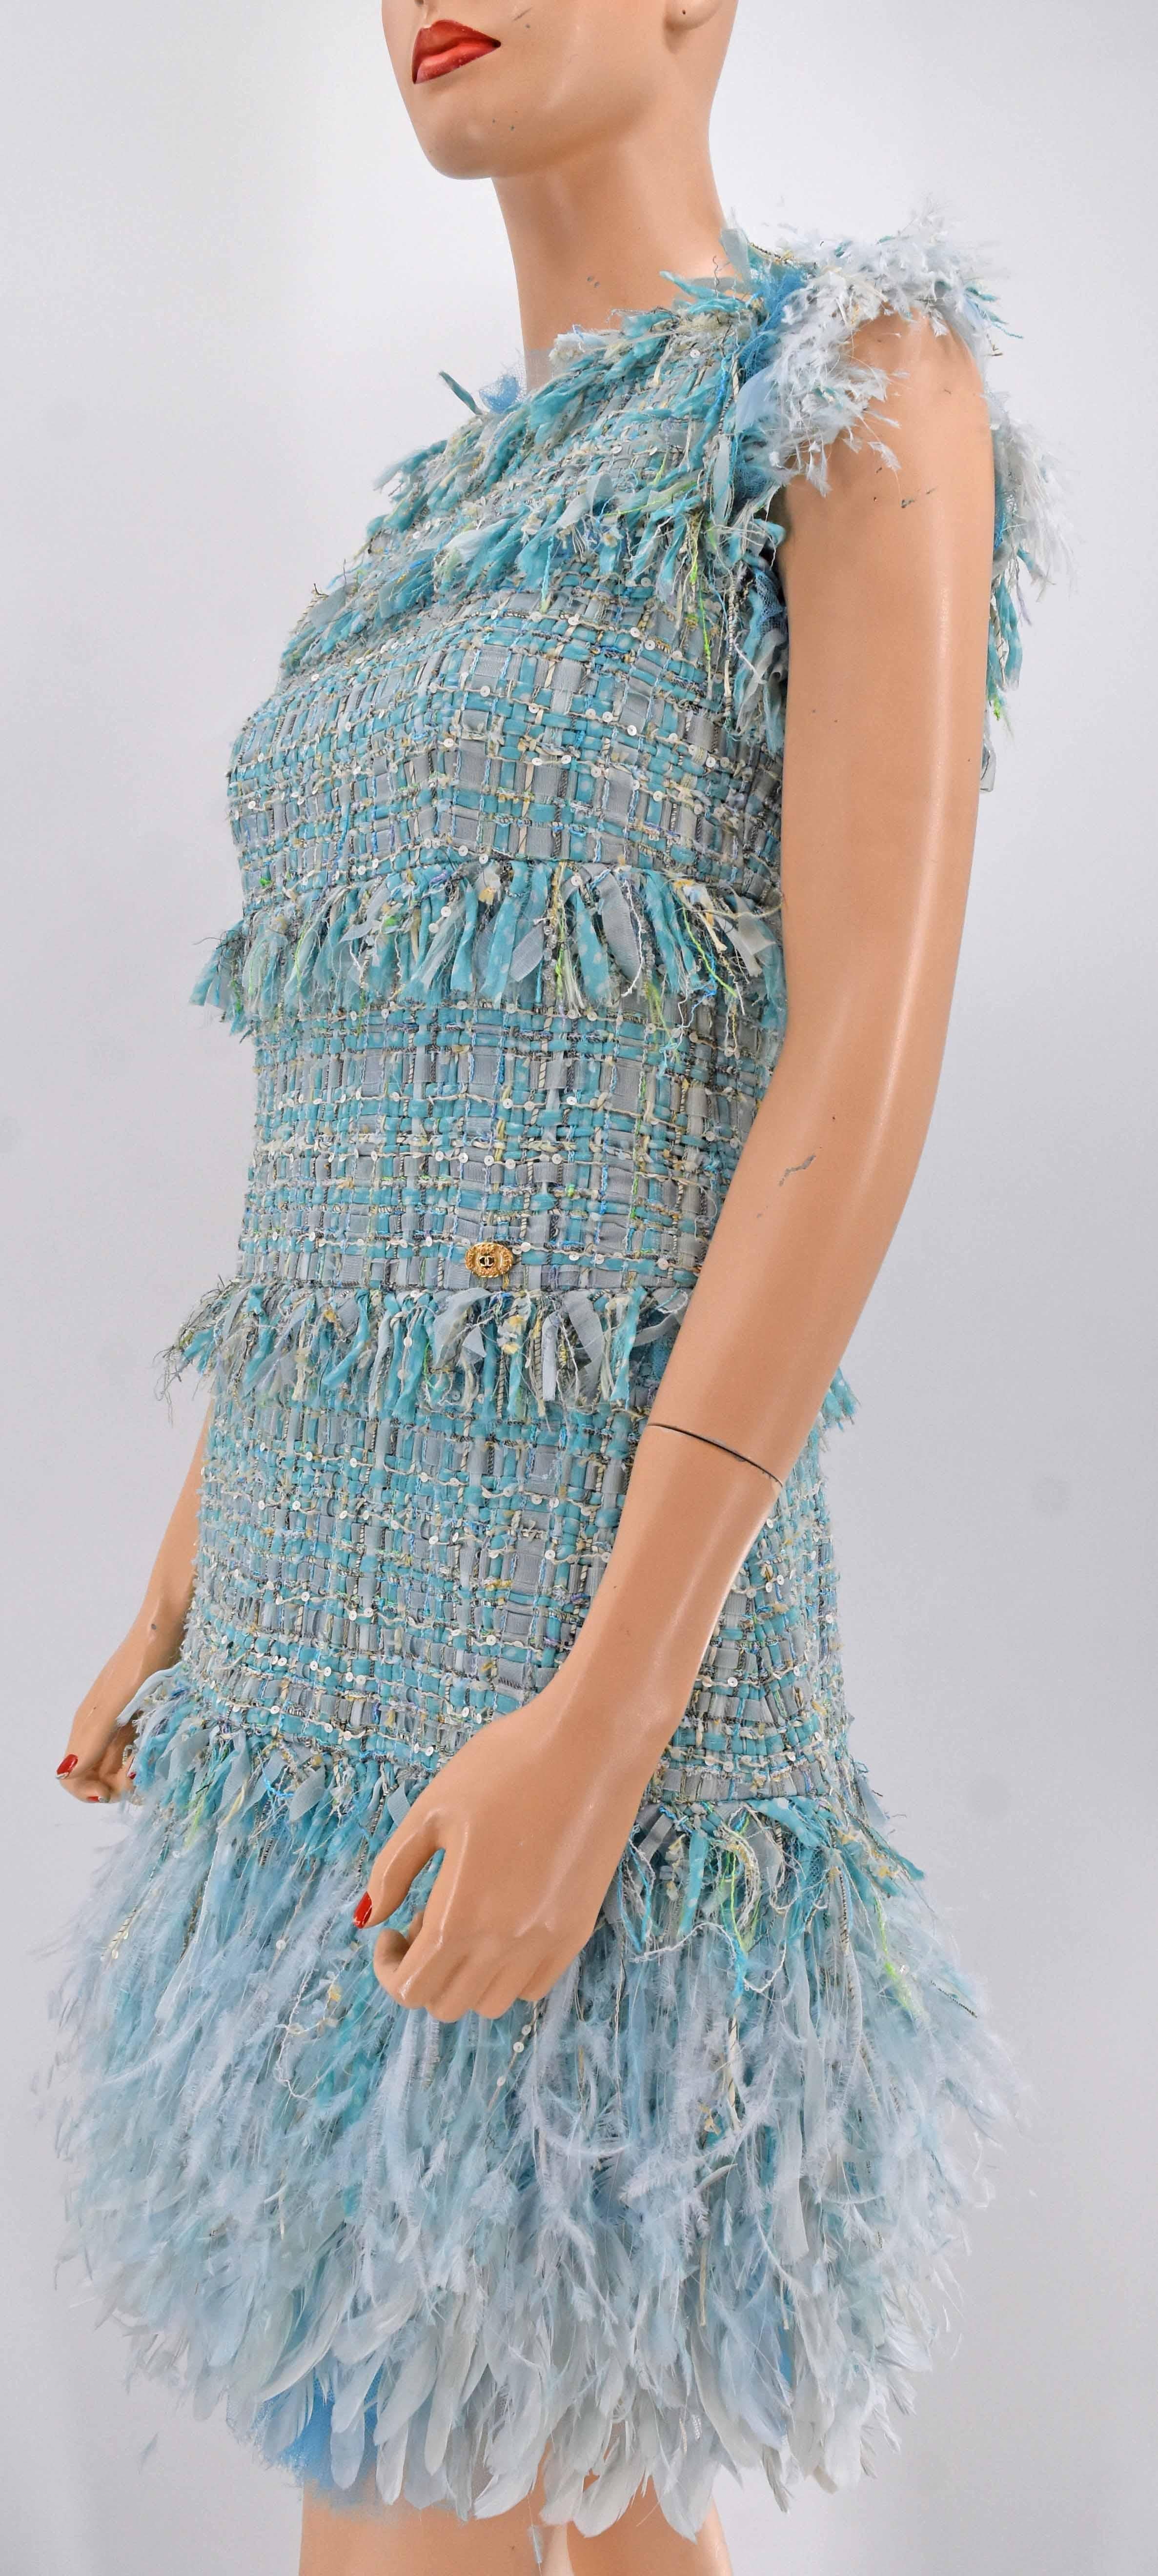 Chanel Tweed Jeweled Runway Fringe Dress With Belt NWT $14, 310 11P Spring 2011  For Sale 7